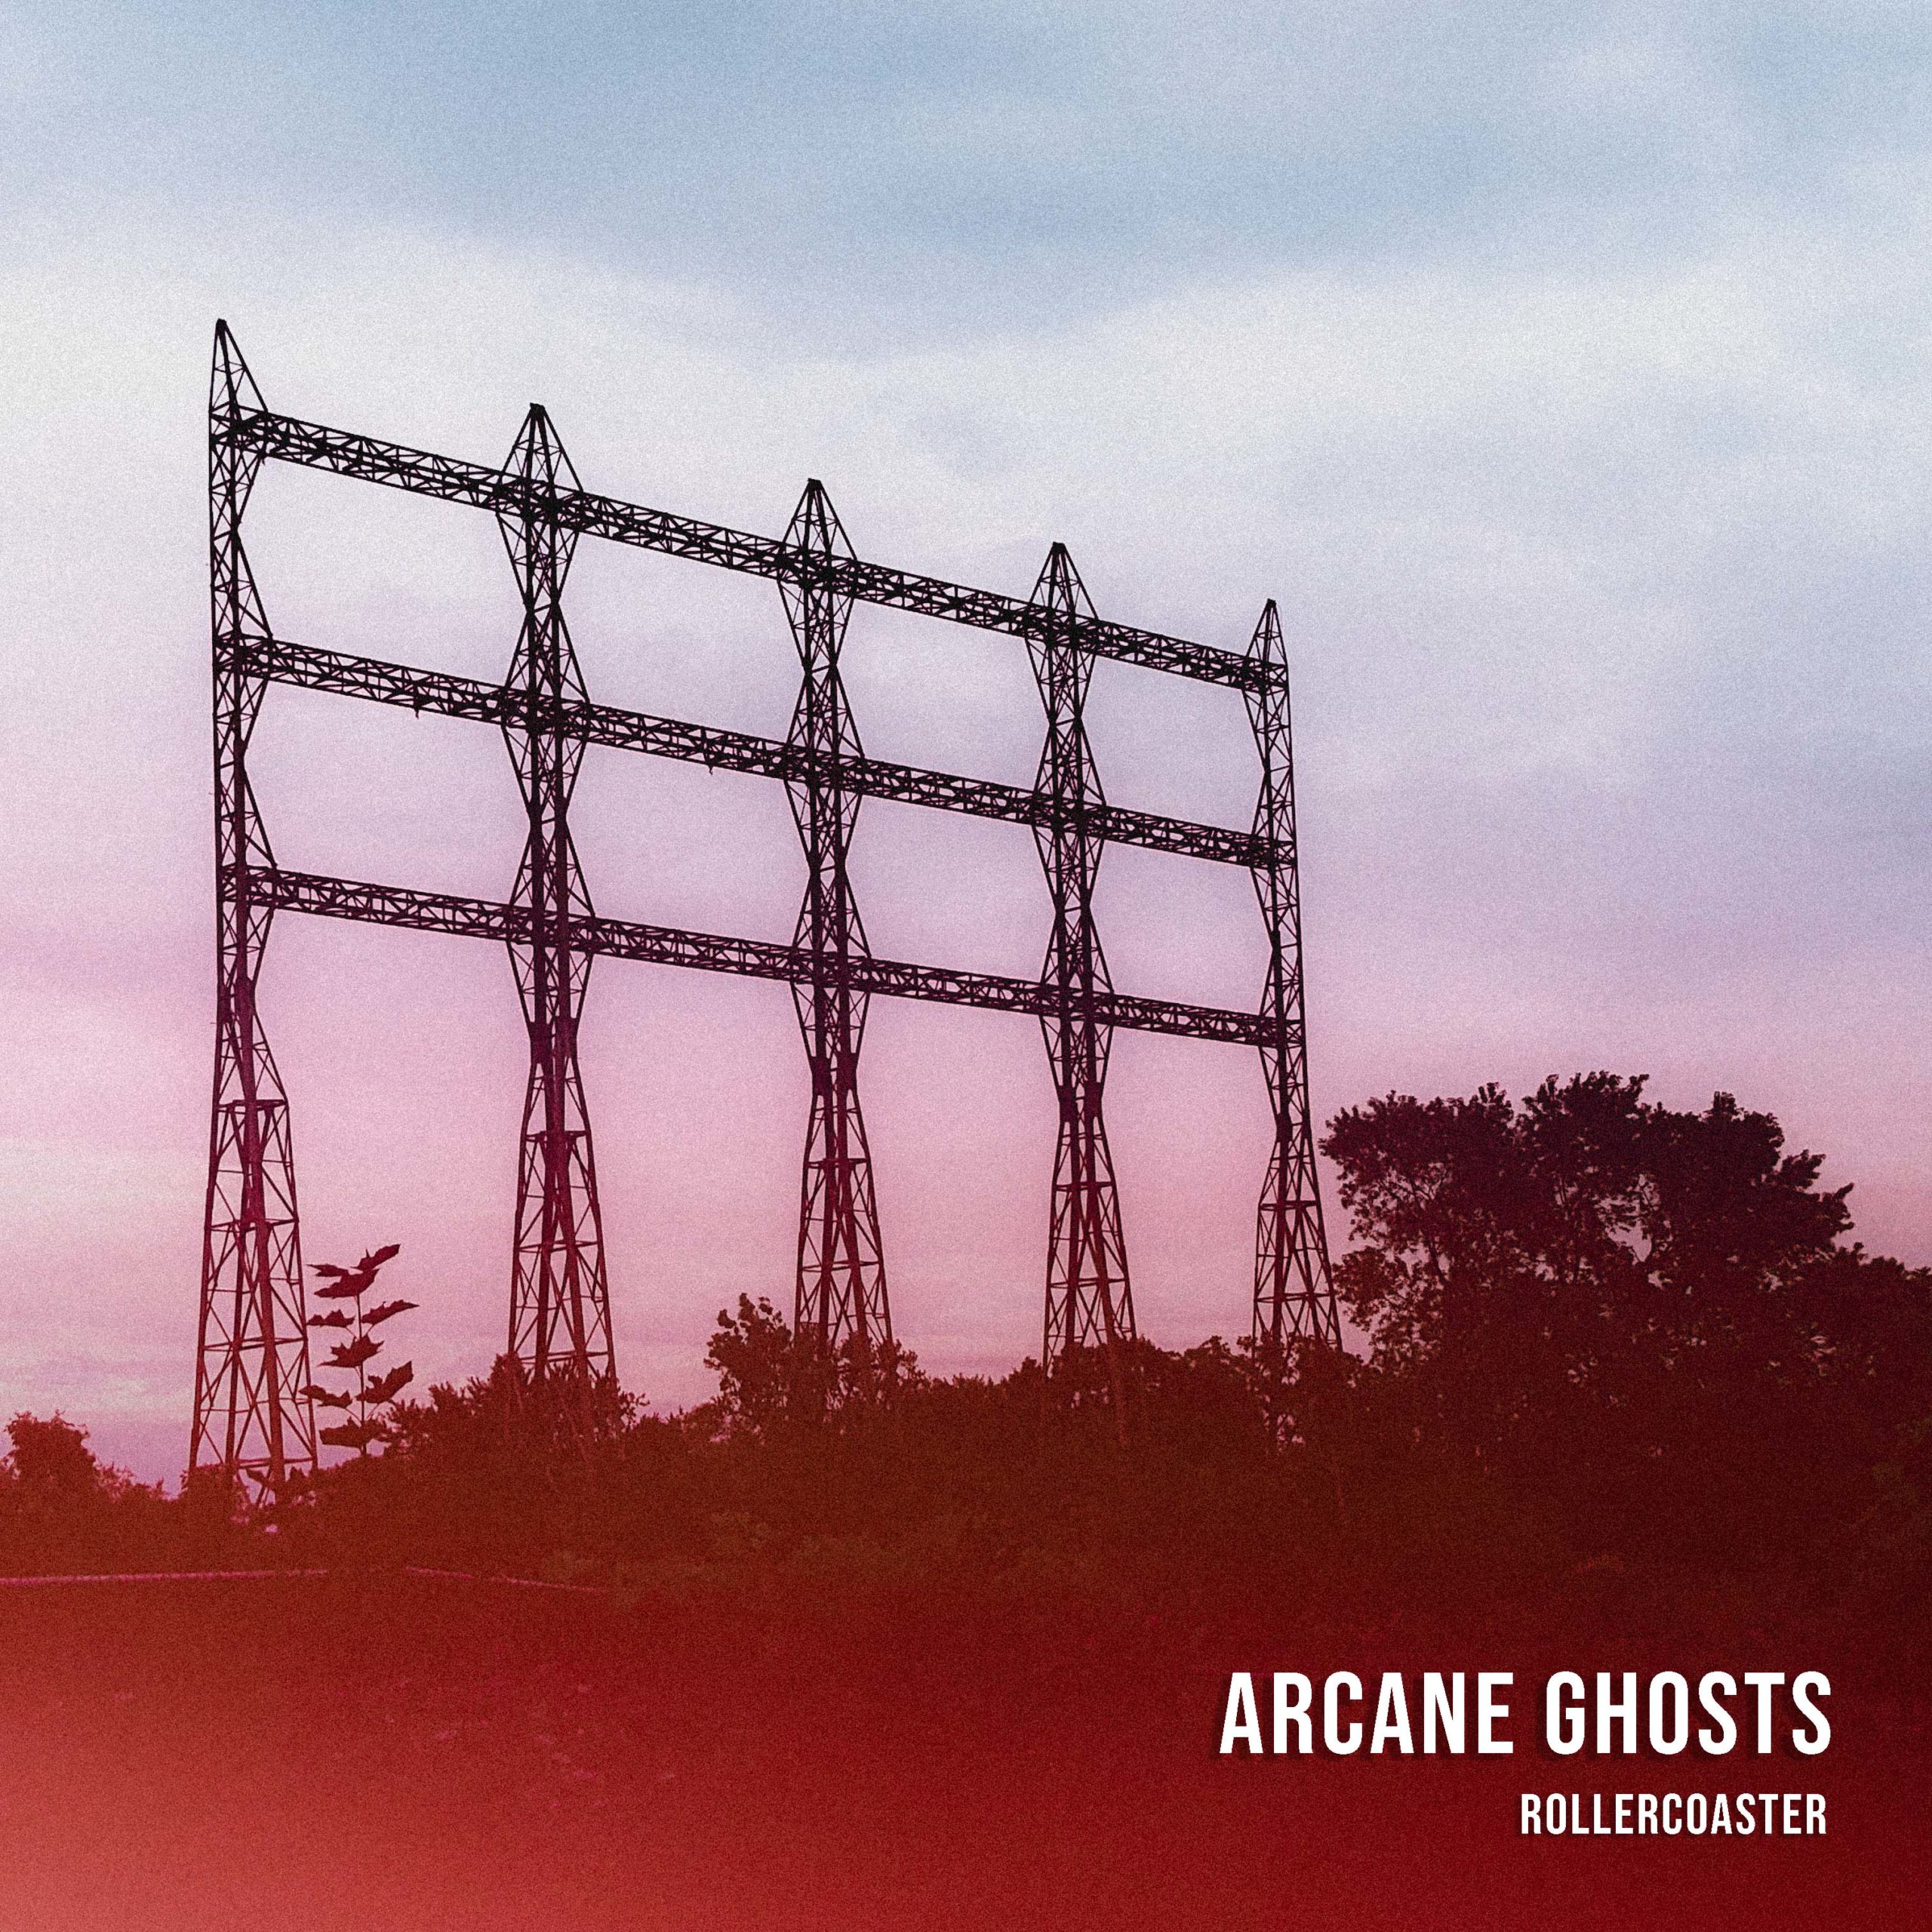 Arcane Ghosts Reflect on the Ups and Downs With Their New Single “Rollercoaster” [Premiere]